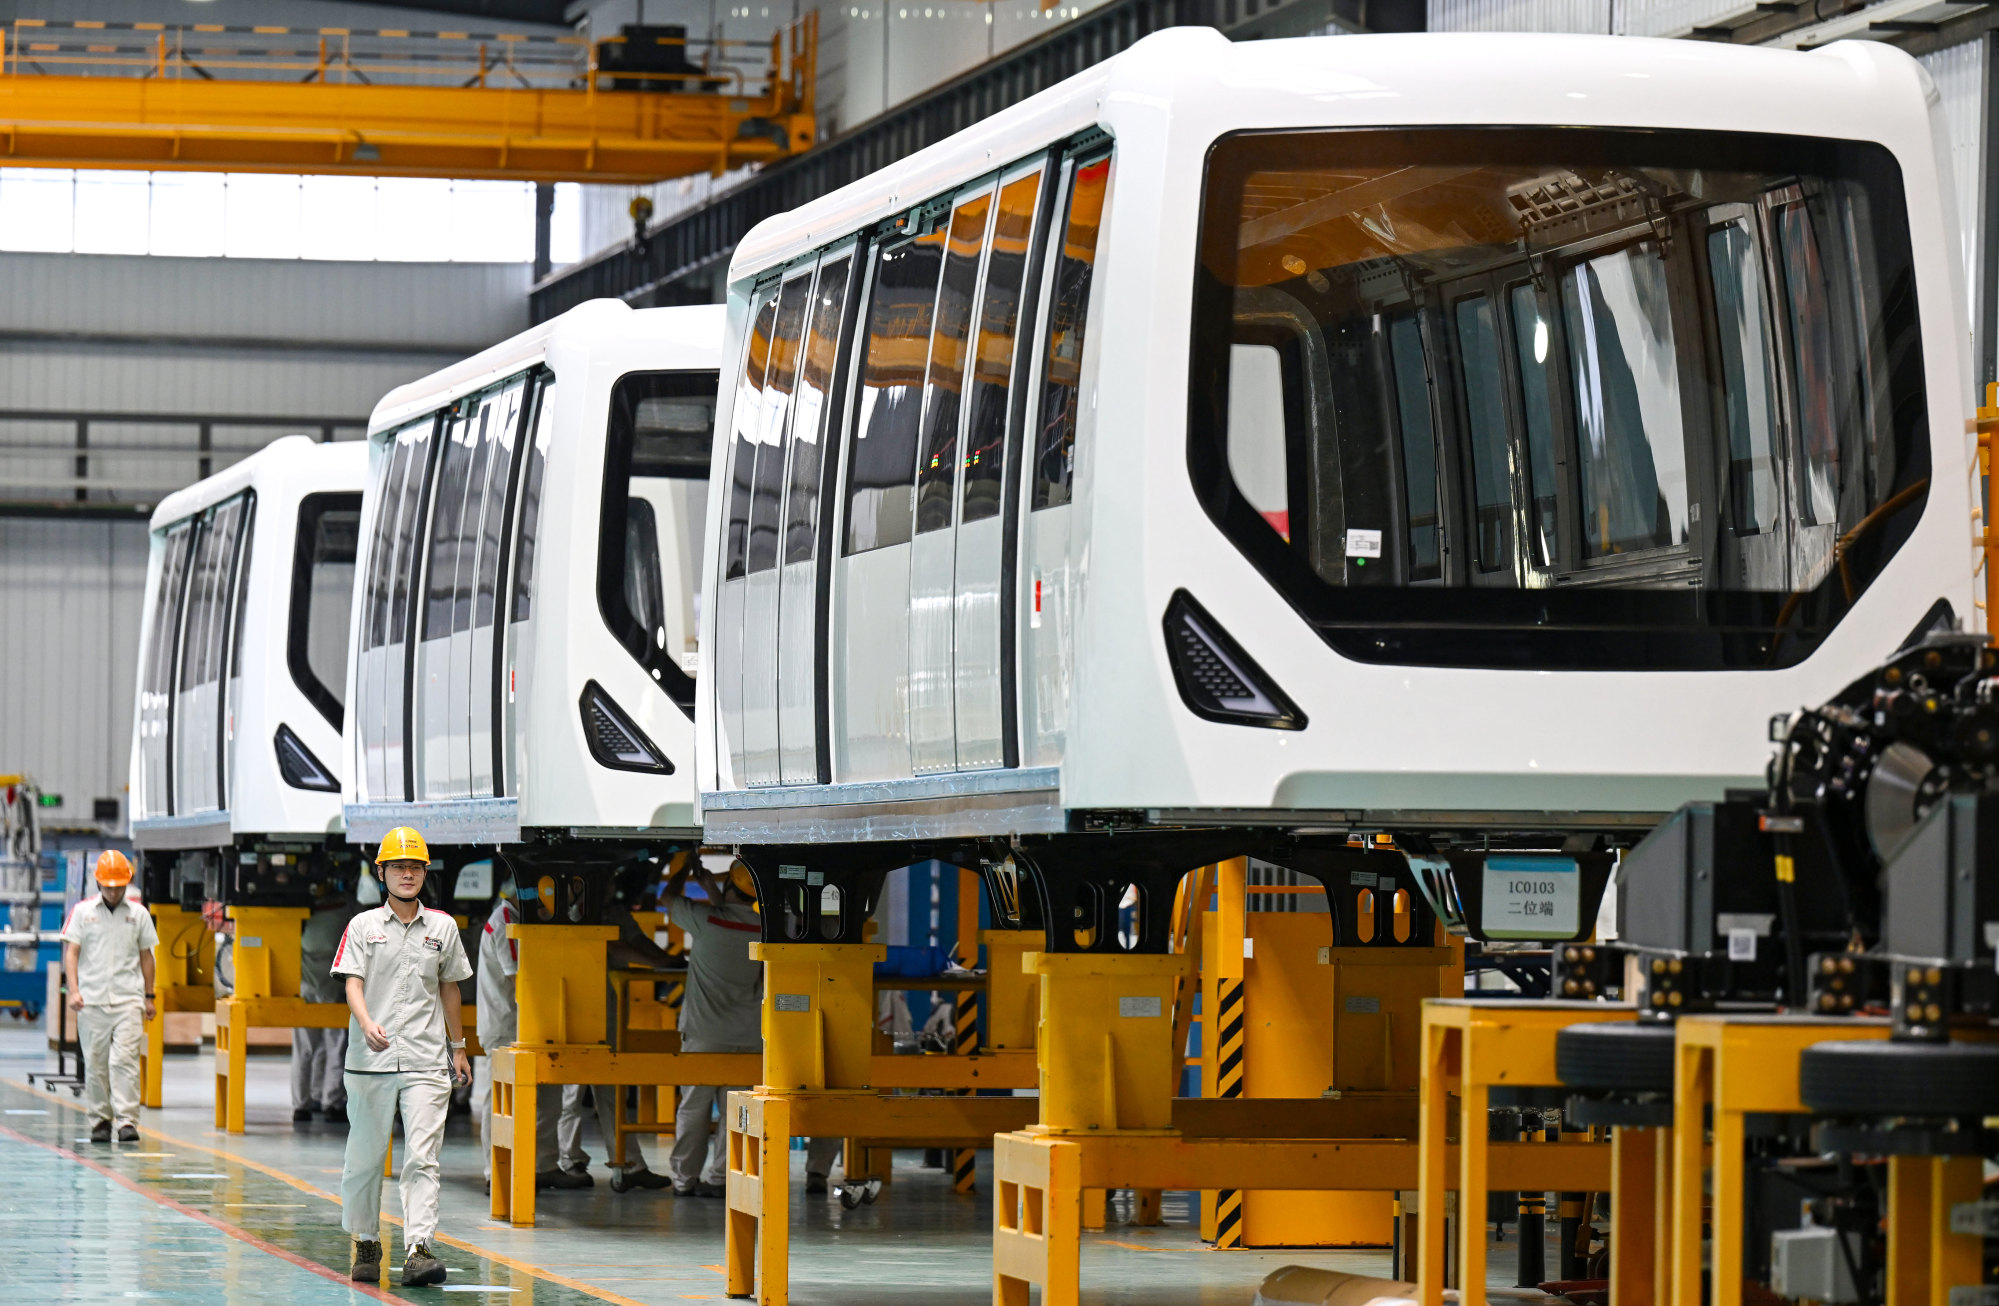 CRRC Qingdao Sifang Locomotive Co is a division of state-owned rolling stock manufacturer CRRC Corporation. Pictured is a CRRC manufacturing facility in Wuhu, Anhui province. Photo: Xinhua